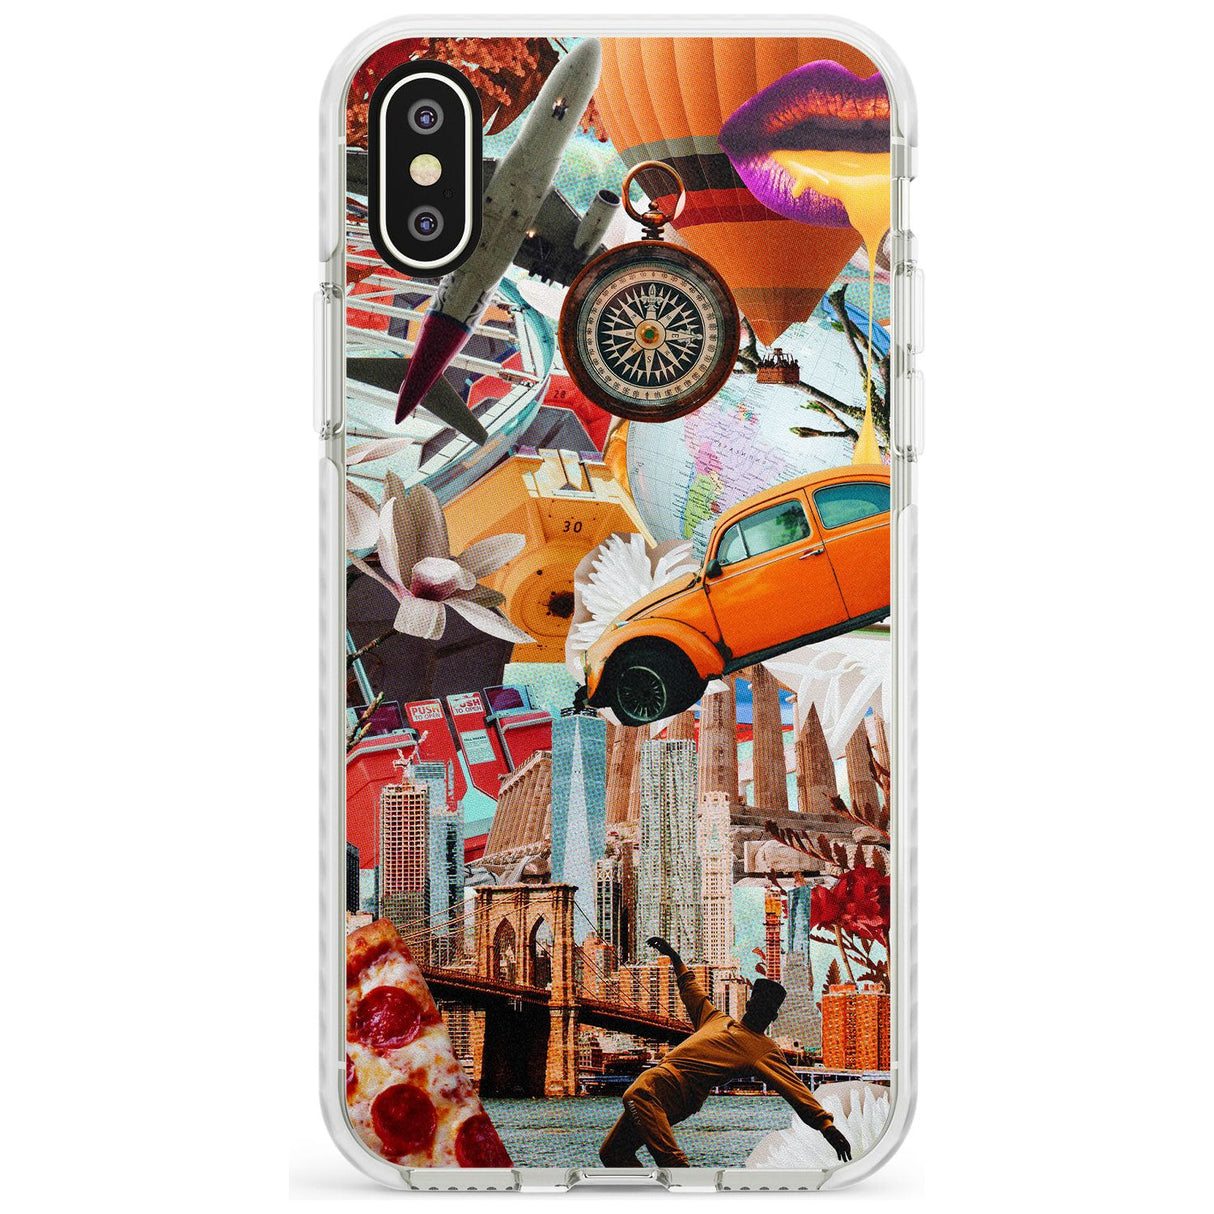 Vintage Collage: New York Mix Impact Phone Case for iPhone X XS Max XR